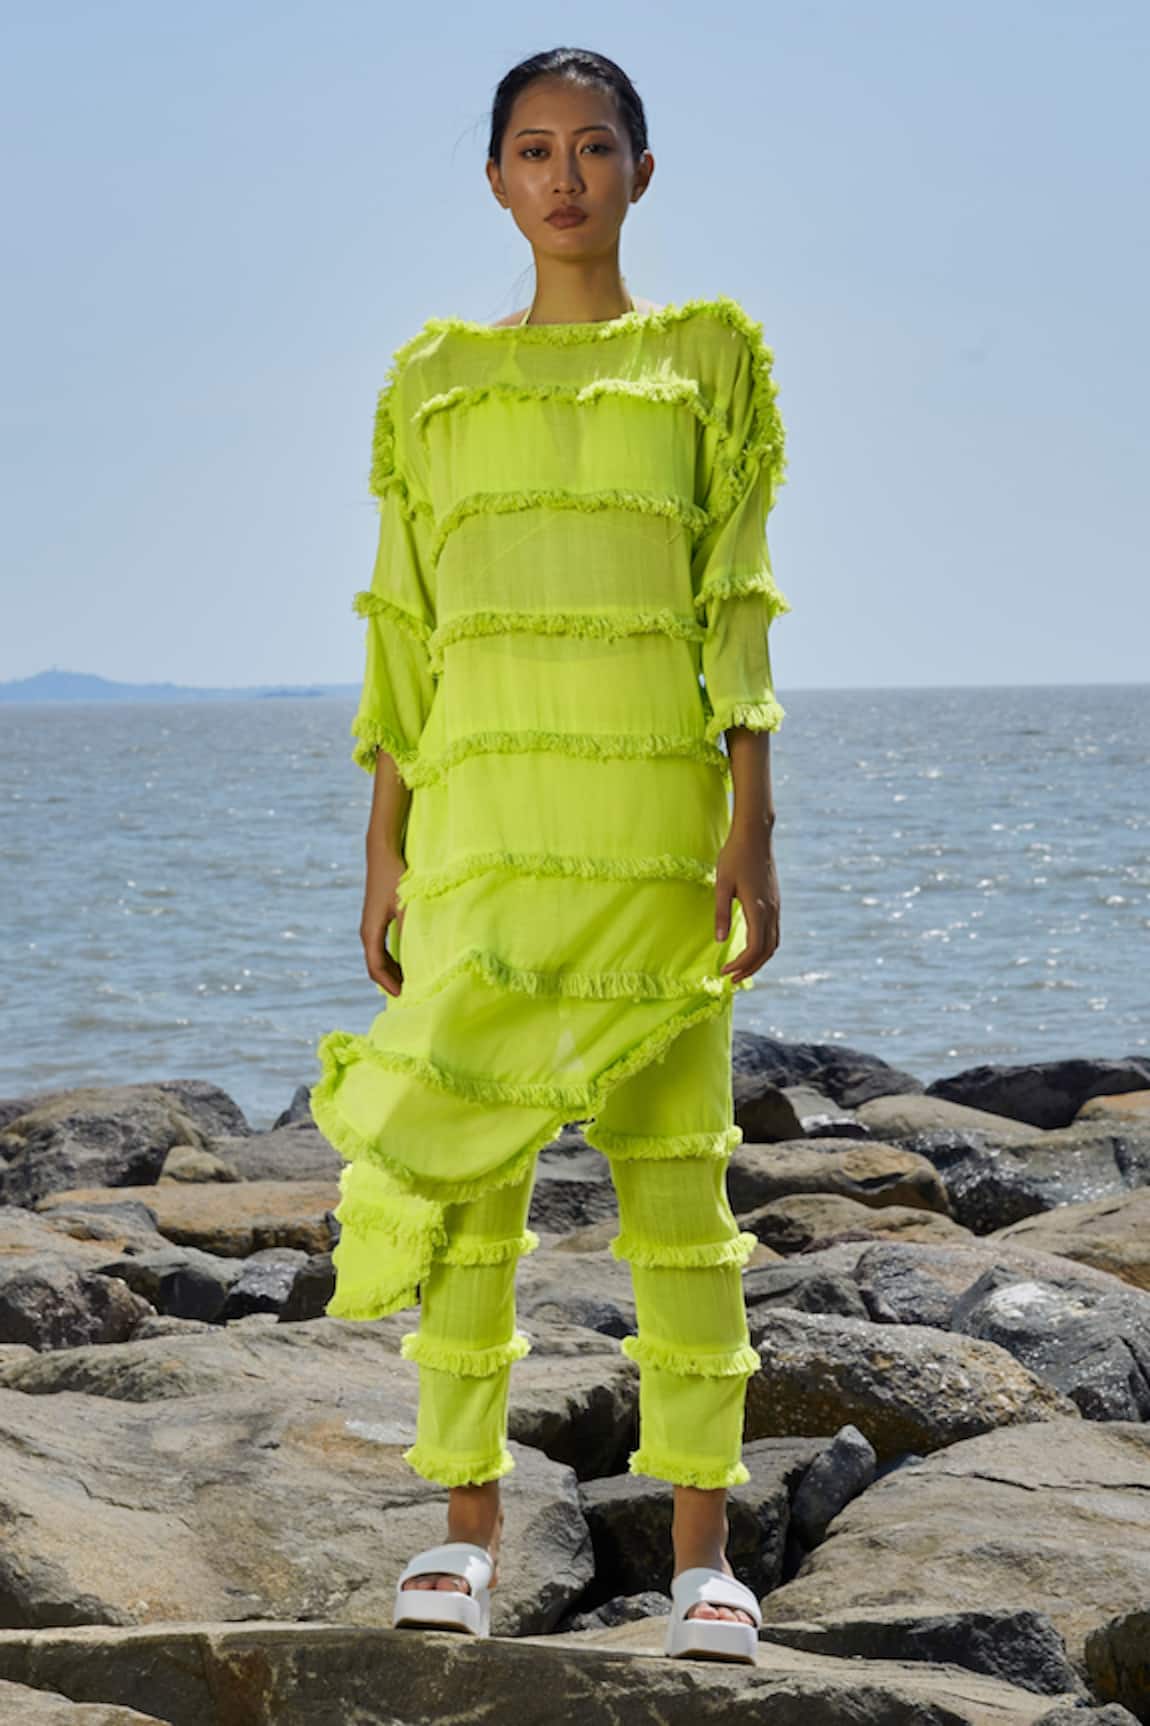 Dress pants with a crease NEON GREEN  NEW COLLECTION  Show all NEW  COLLECTION  Trousers   Sukienki   MODERN ELEGANCE   POWERSUITS    FOR DAYTIME AND NIGHTTIME 